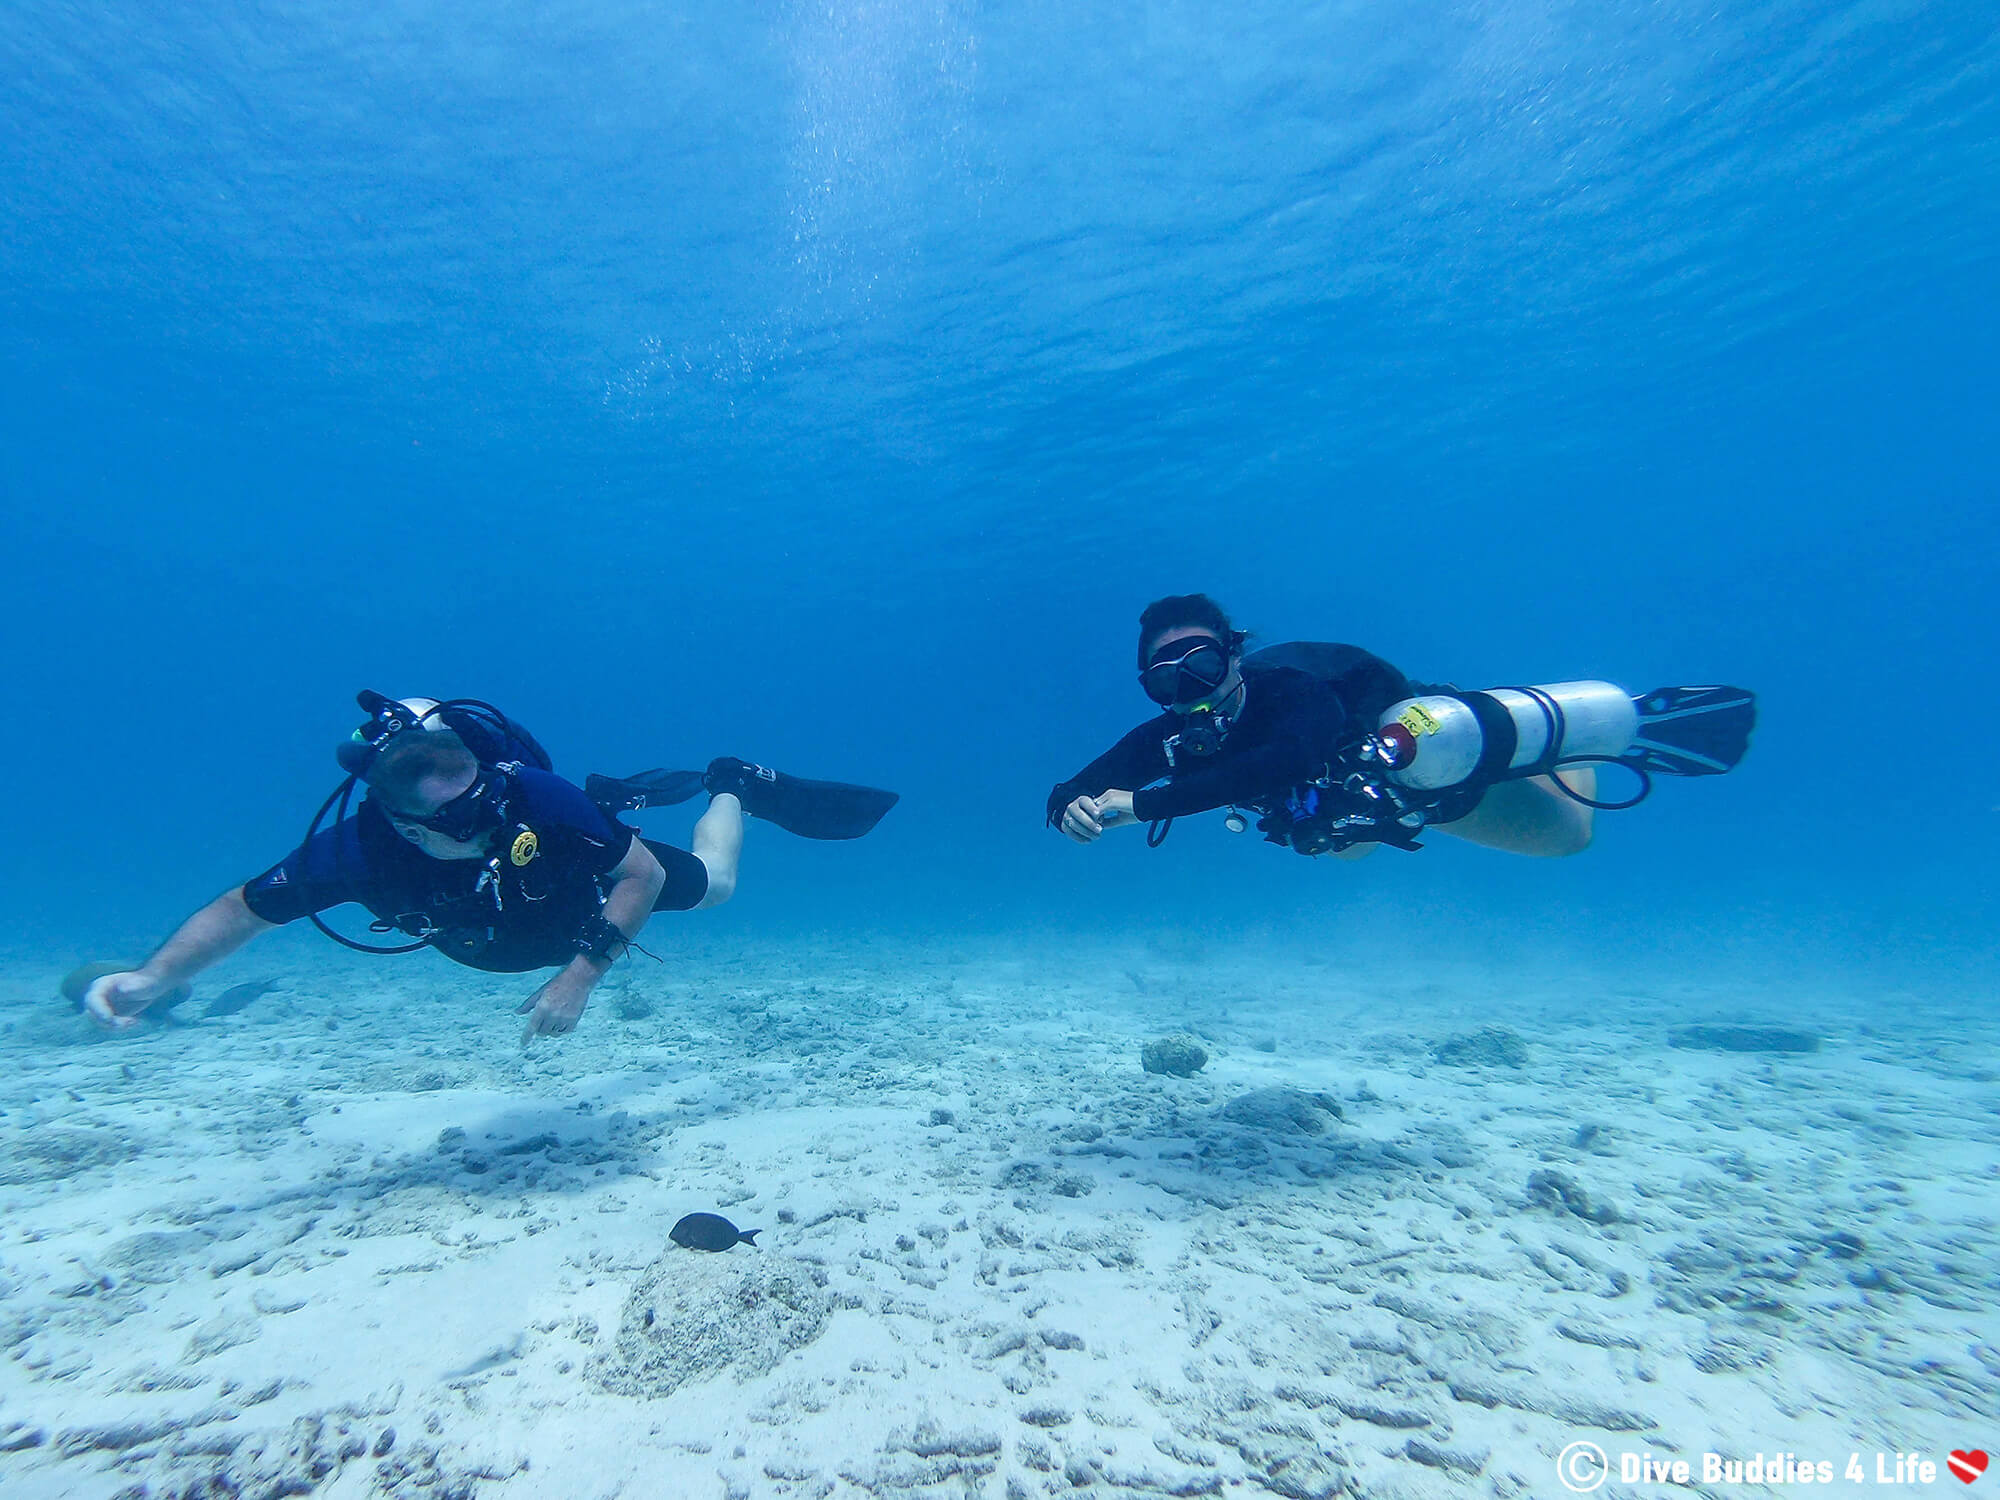 Ali Trying Sidemount Style Scuba Diving At The Bonaire Technical Diving Week, Caribbean